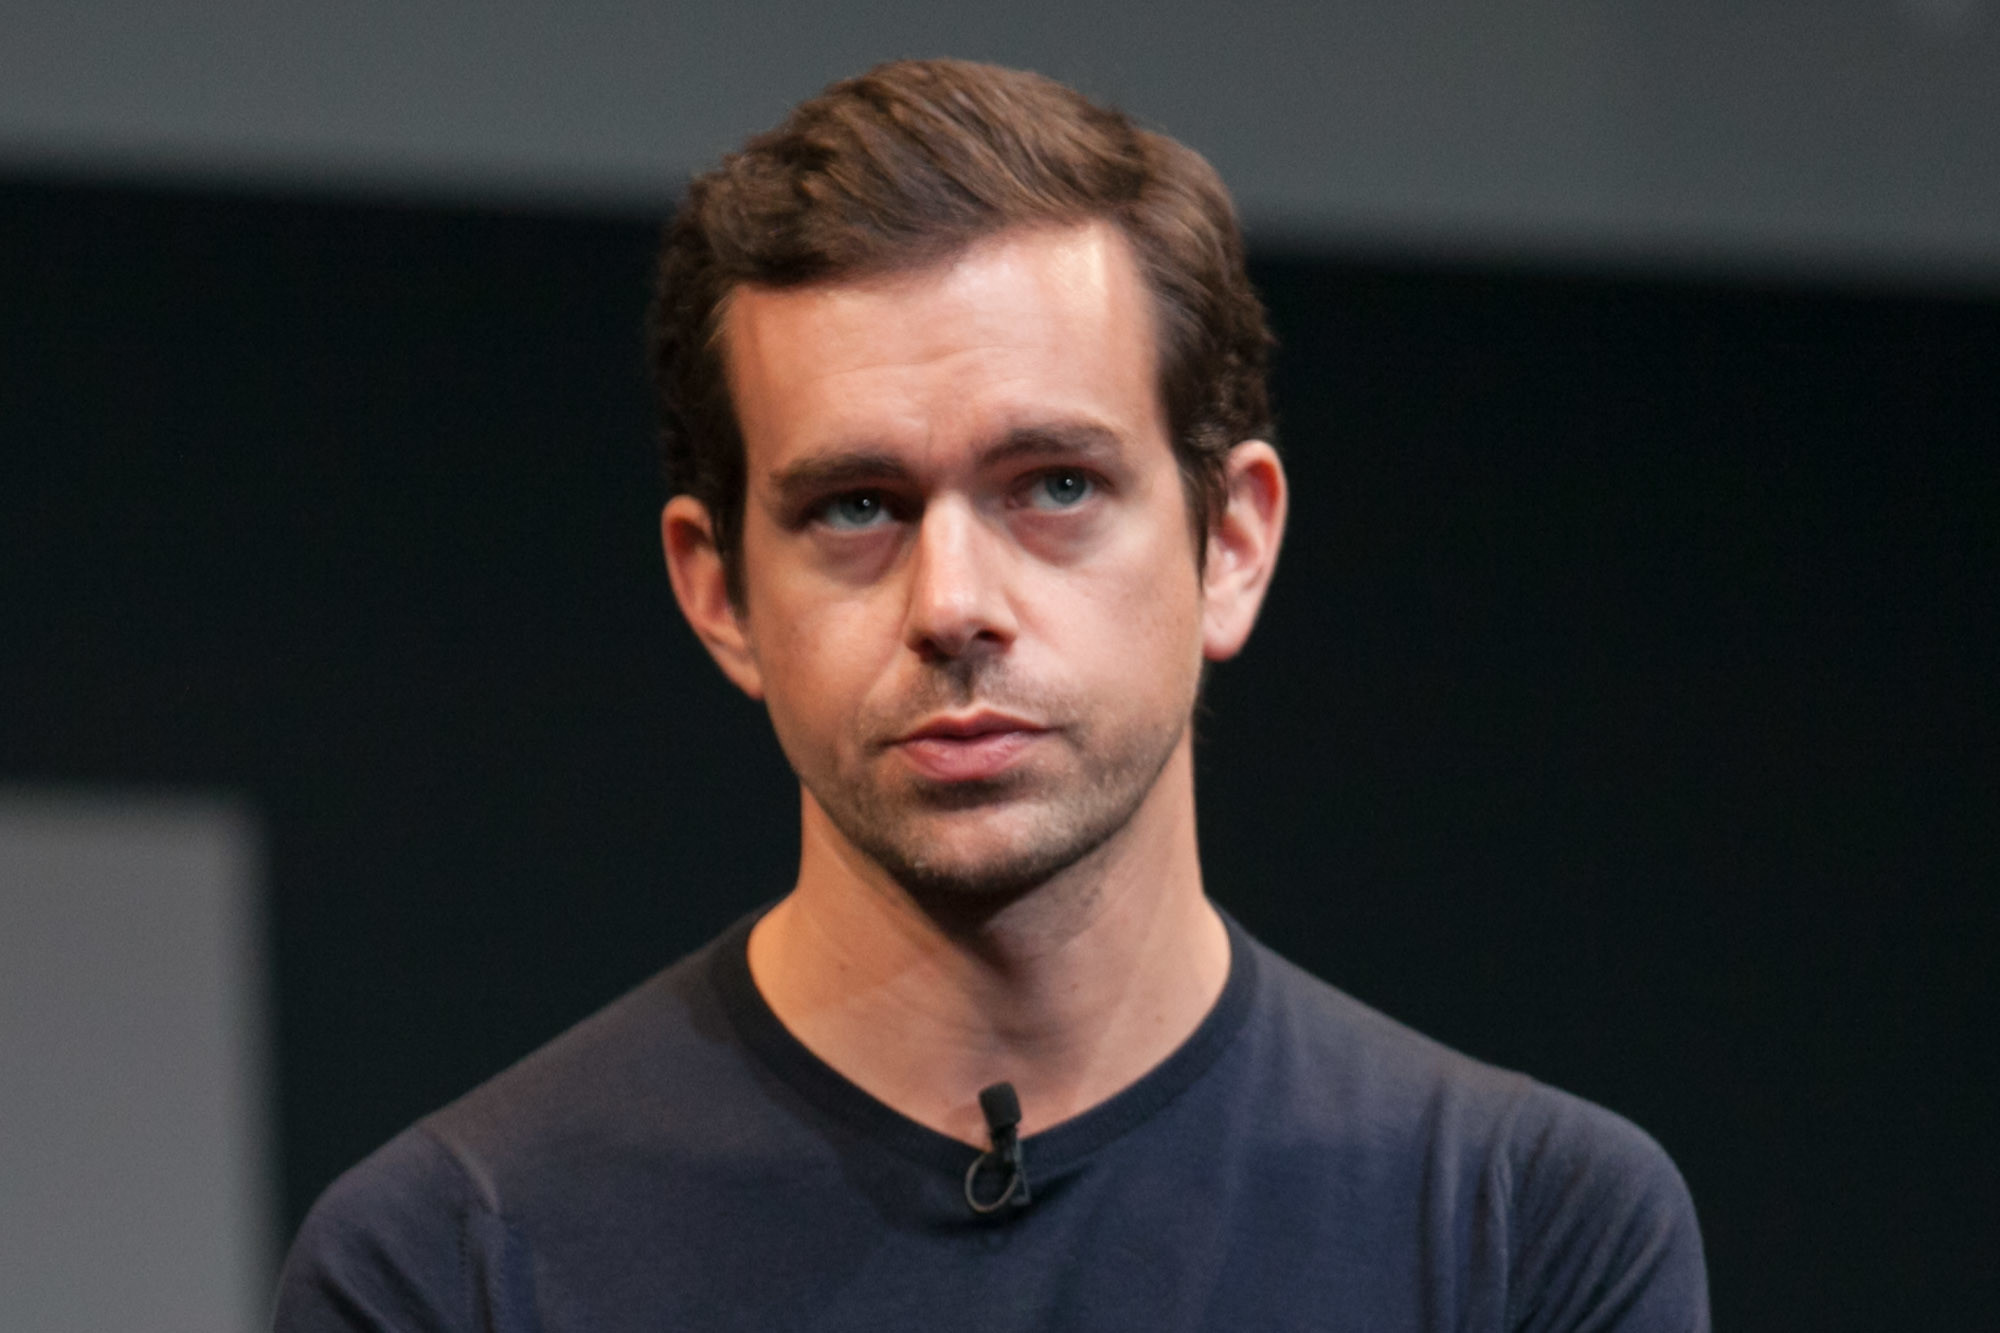 Jack Dorsey and rapper Jay-Z will set up bitcoin development fund